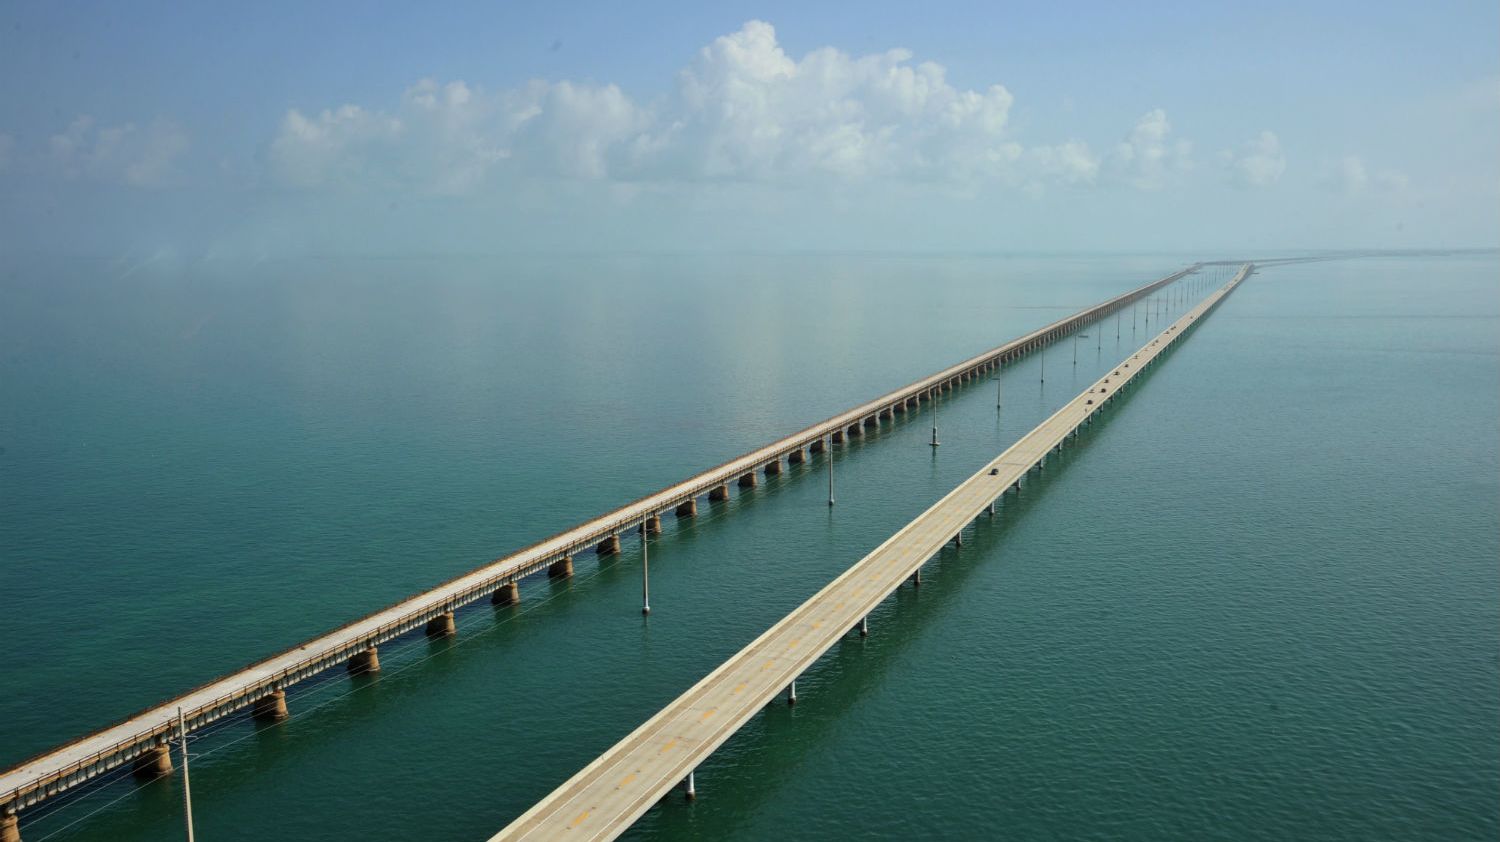 What's the Longest Bridge in the World? Mental Floss